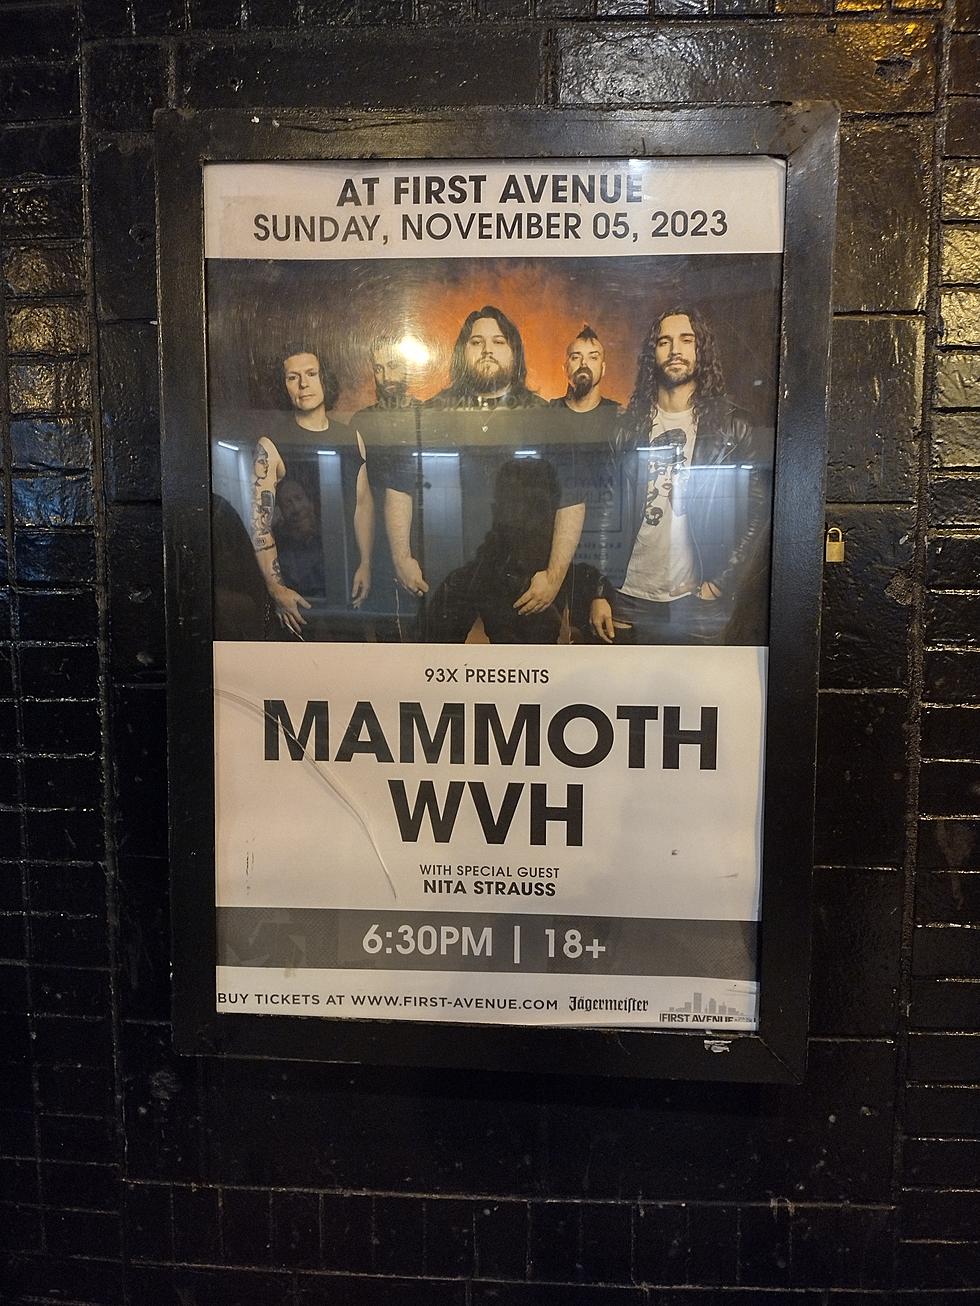 [LOOK] Pics From Mammoth WVH at First Avenue in Minneapolis